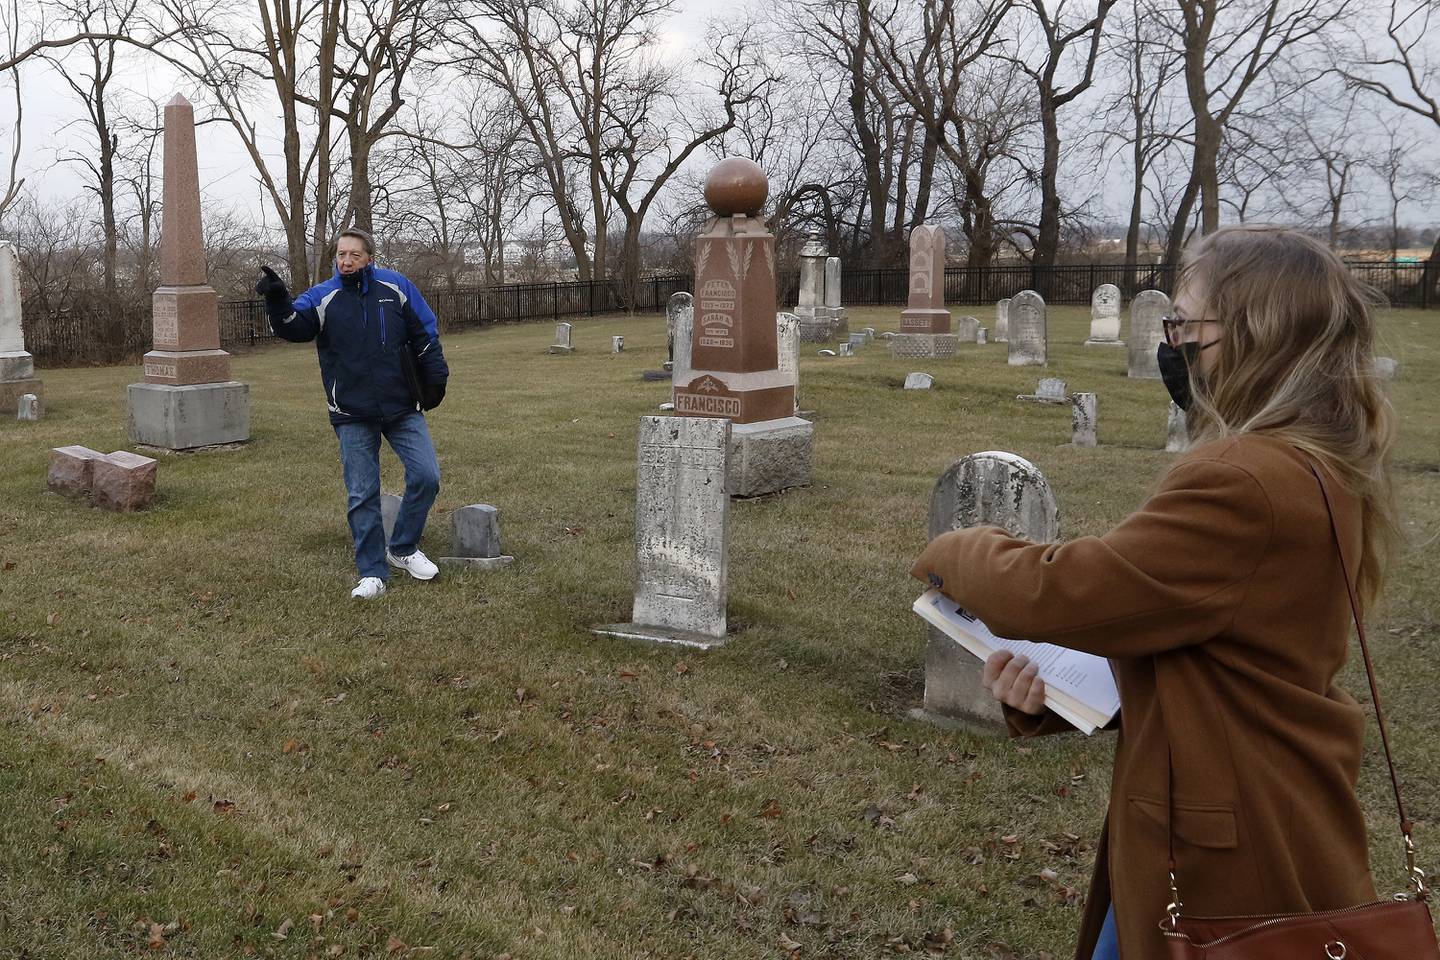 Amanda Helma and Doug Peterson, both of the McHenry area, search through Ostend Cemetery to find an unmarked burial plot on Tuesday, Dec. 21, 2021, in McHenry.  The two are working to identify the boy who died in 1963 and issue a headstone for him.